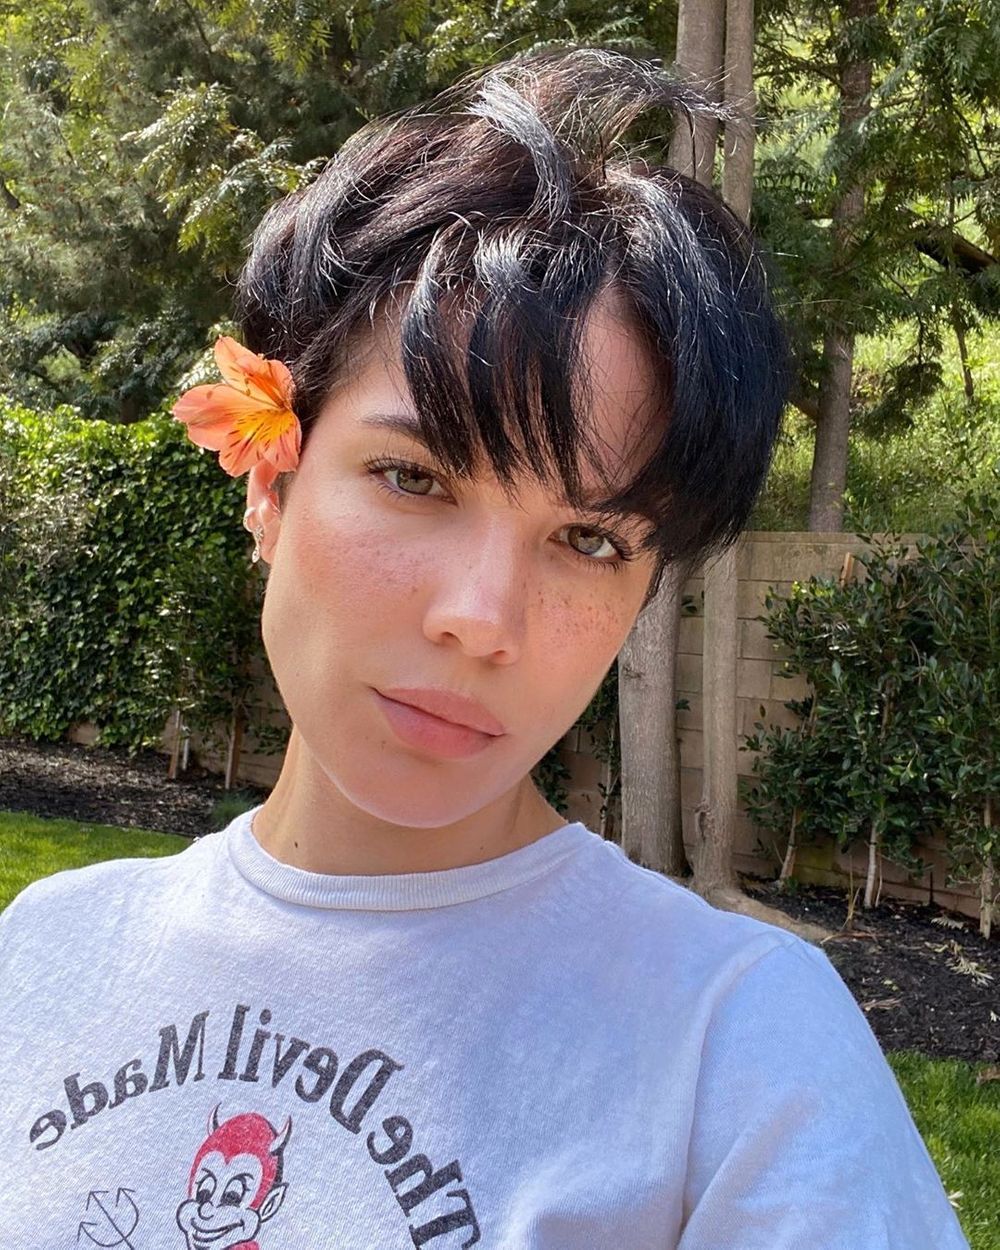 Halsey Sets Instagram On Fire With Fully Nude Photo For Earth Day